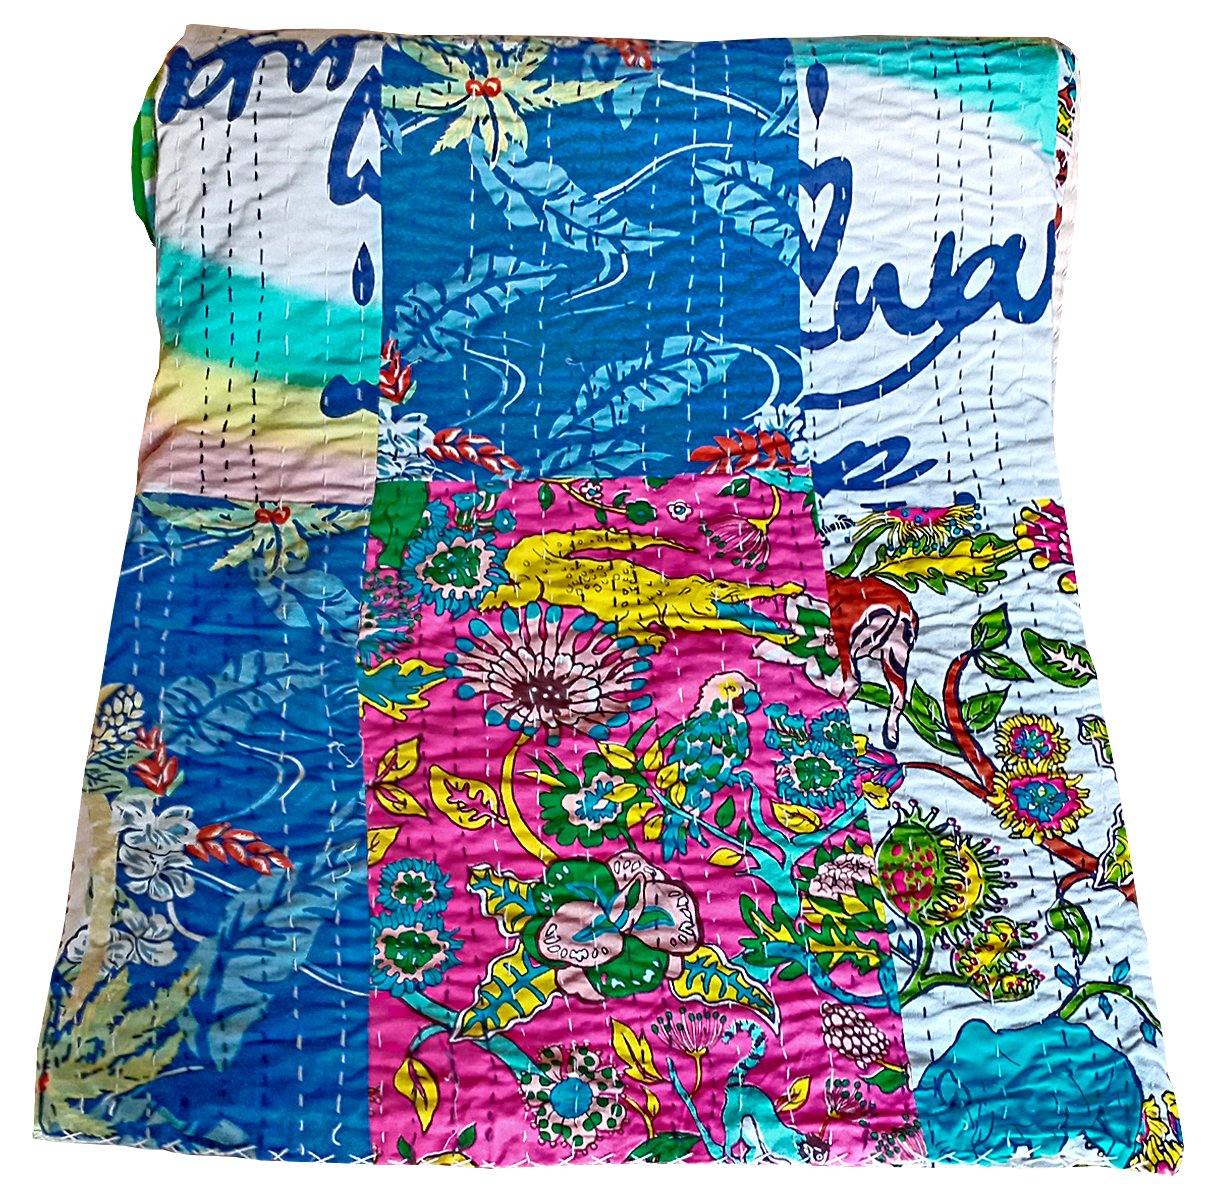 Aqua Patchwork Kantha Quilted King Bedcover - The Teal Thread